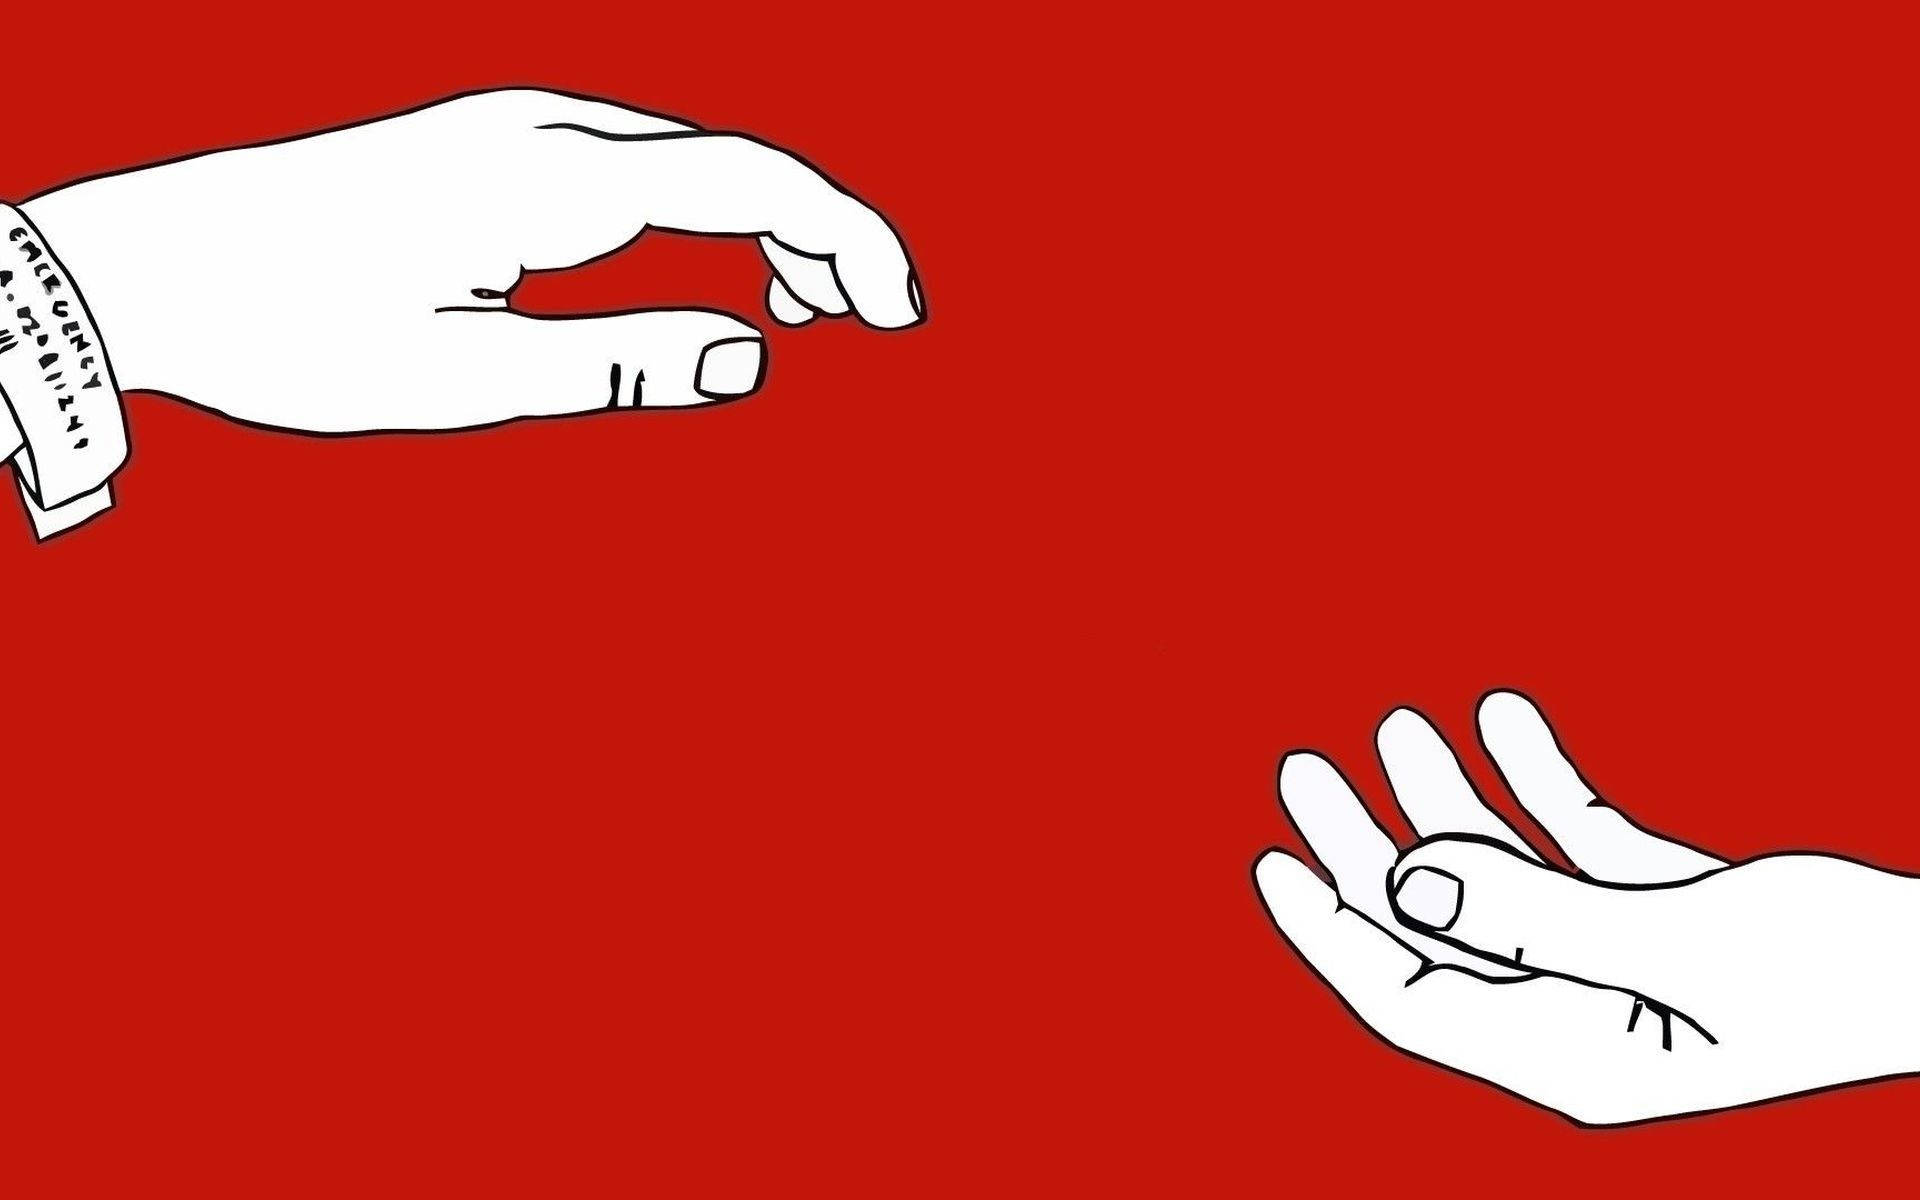 Indie Aesthetic Laptop Hands Meeting On Red Background